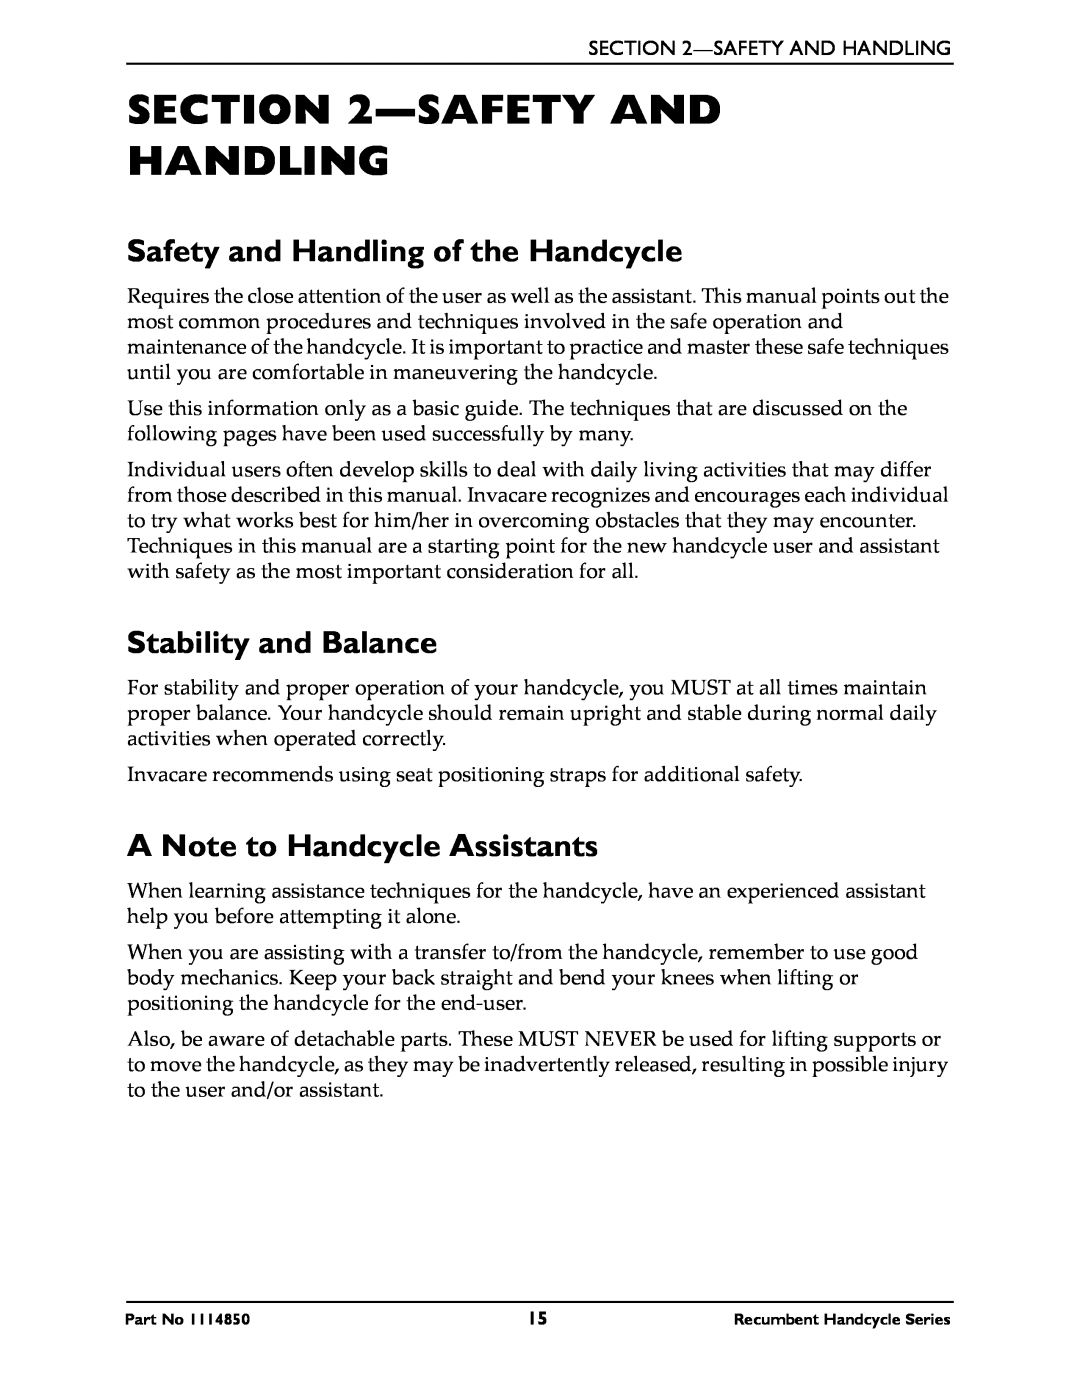 Invacare Top End XLT Pro, XLTPRO, XLT Jr Safety And Handling, Safety and Handling of the Handcycle, Stability and Balance 